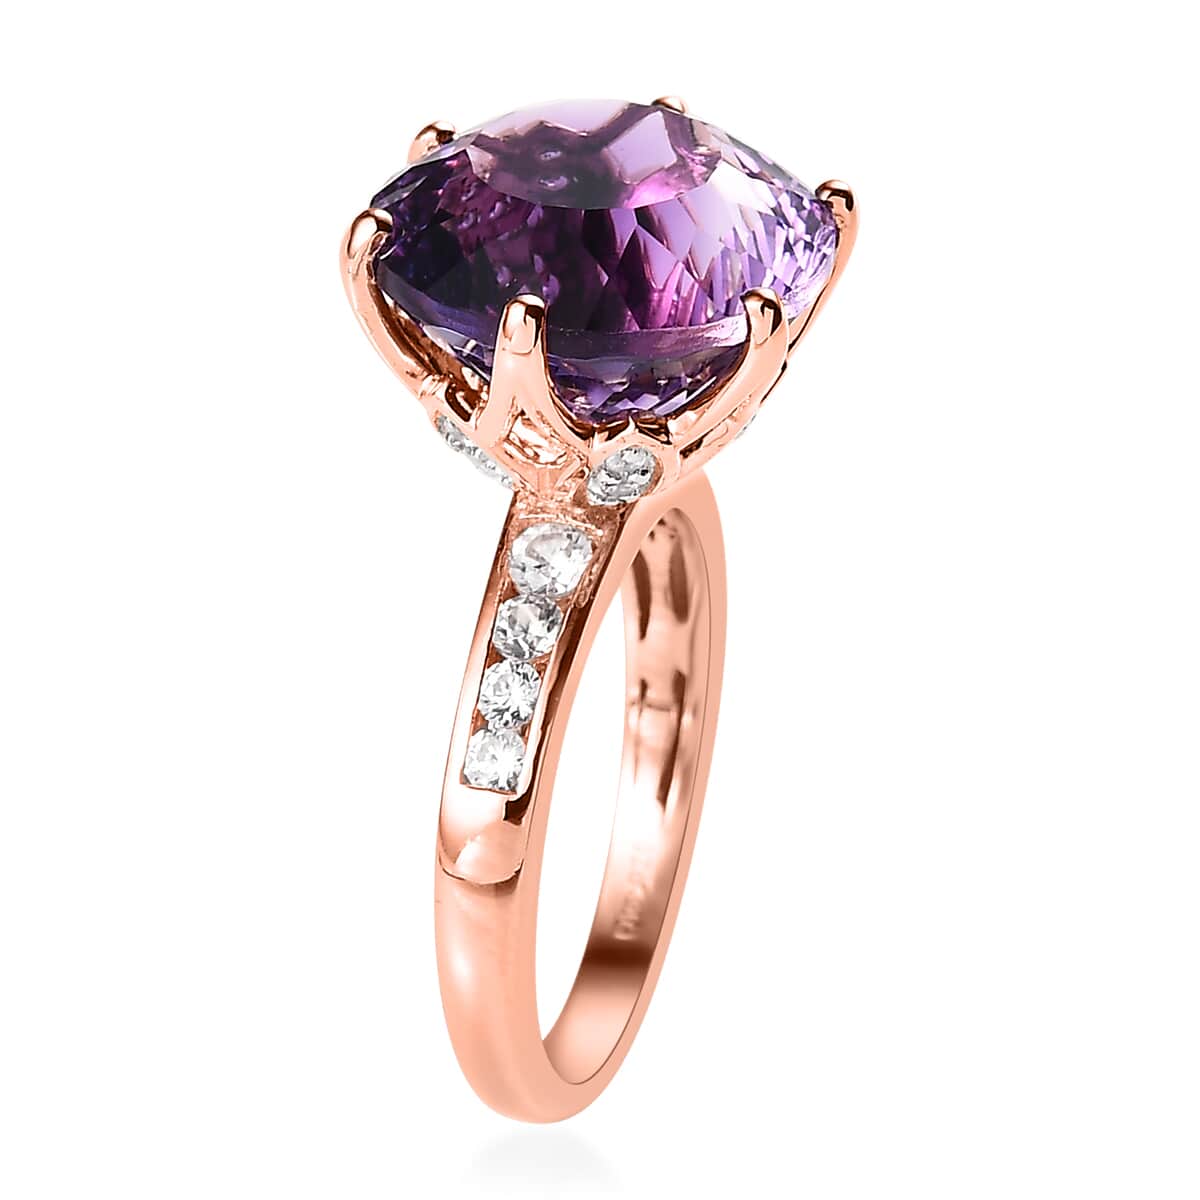 Millennium Cut African Amethyst Ring, White Zircon Accent Ring in Vermeil Rose Gold Over Sterling Silver, Amethyst Jewelry, Gifts For Her 10.60 ctw (Size 10.0) image number 3